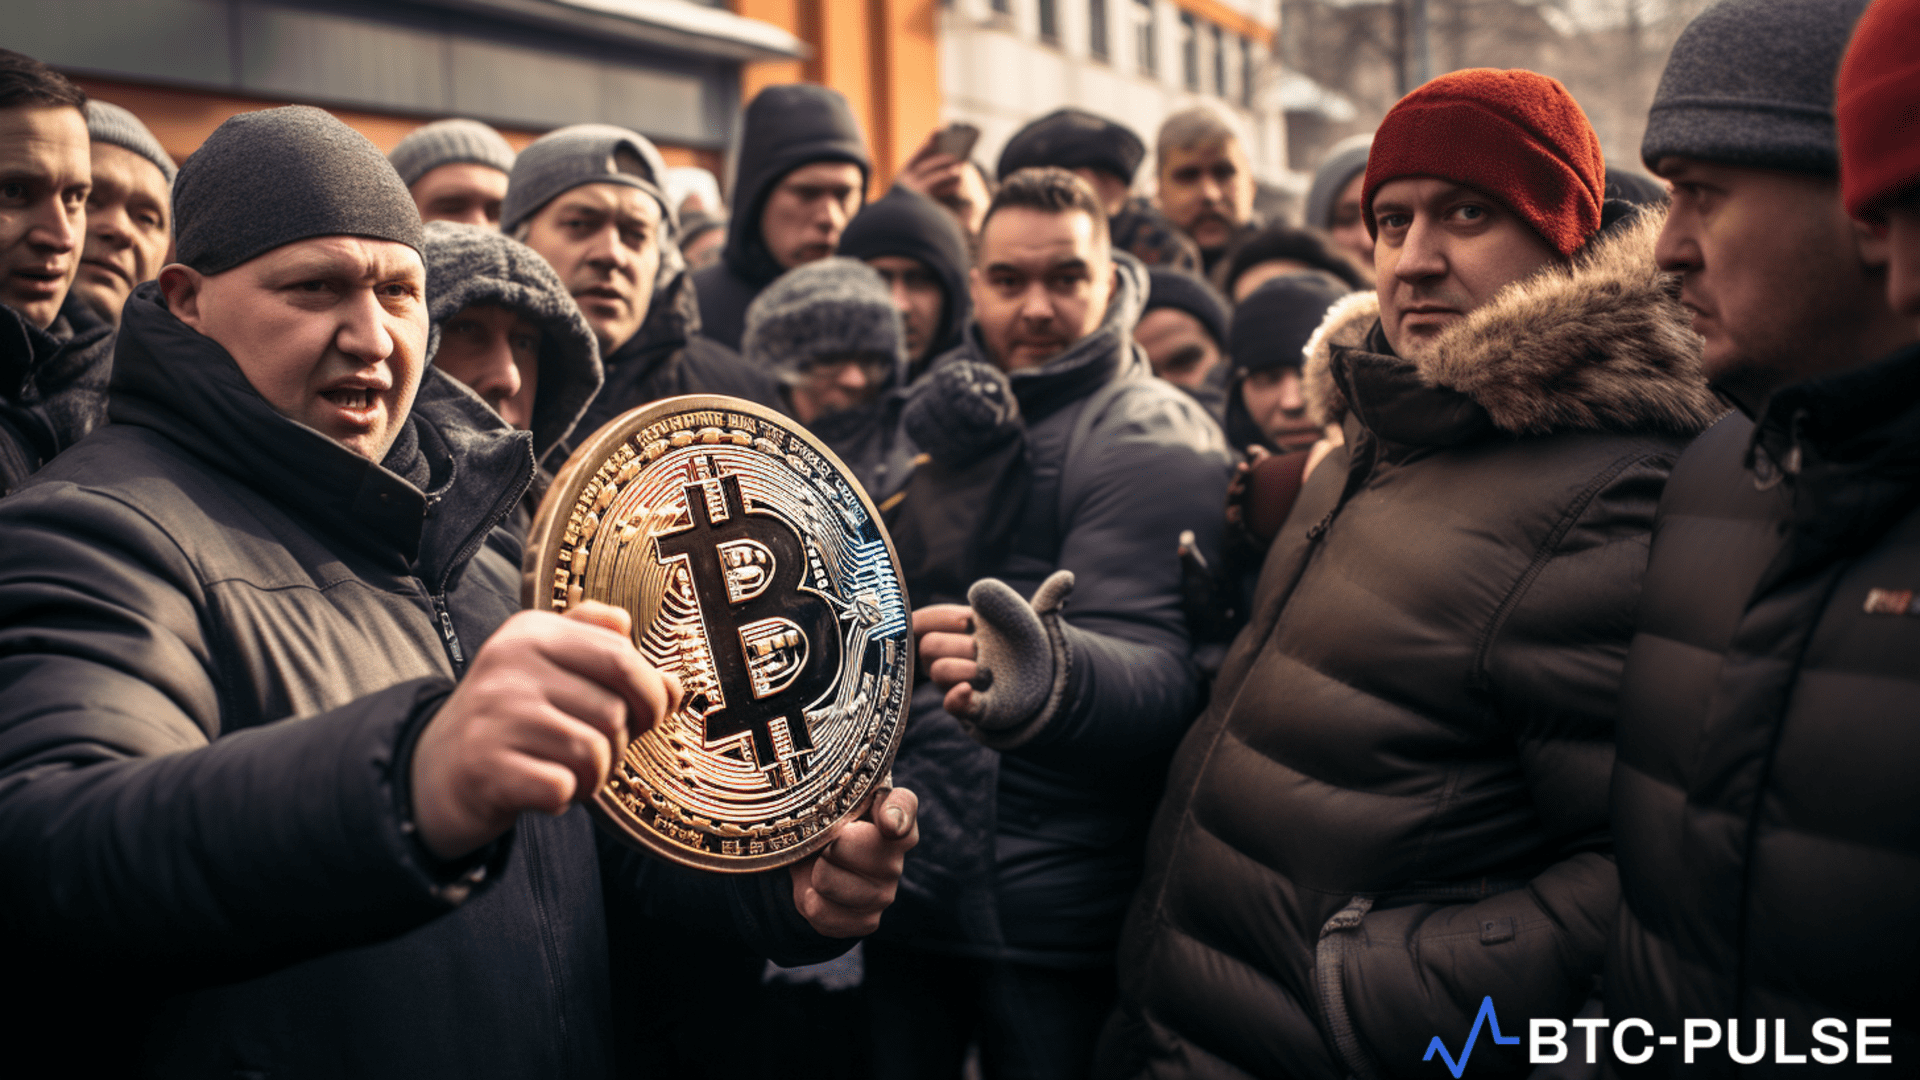 Clients protesting outside Beribit's Moscow office amid potential crypto exchange ban.